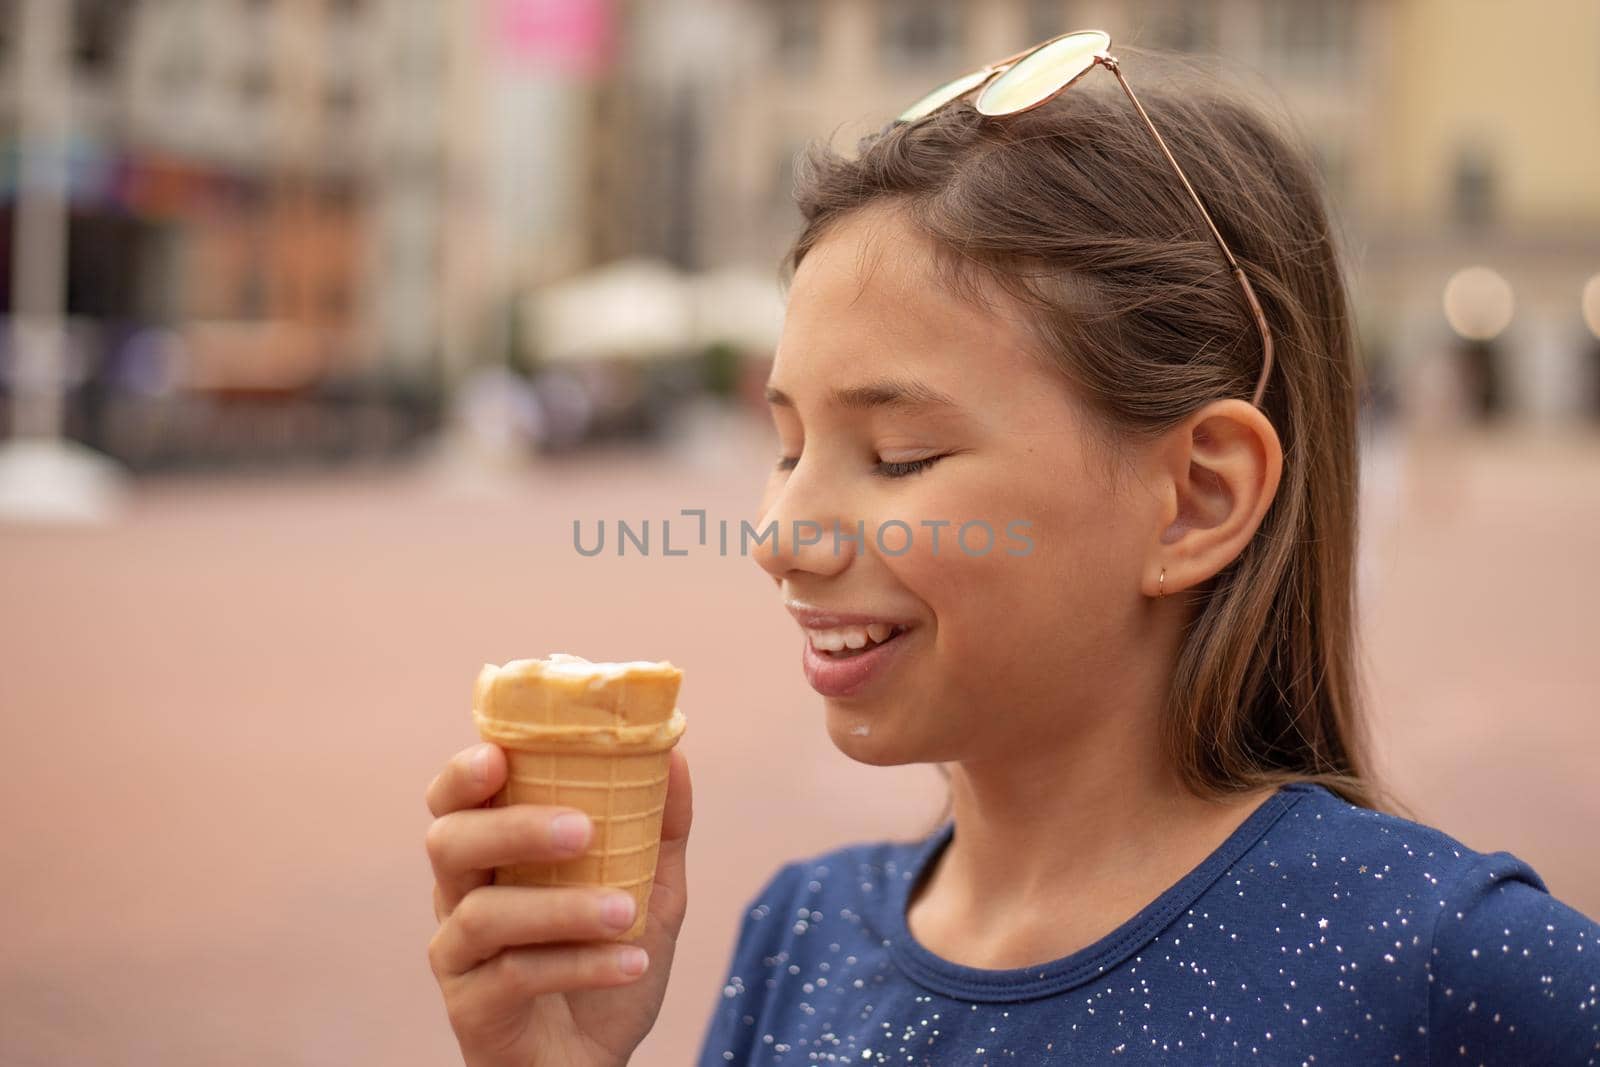 Portrait of a happy child with ice cream in hands on a city street